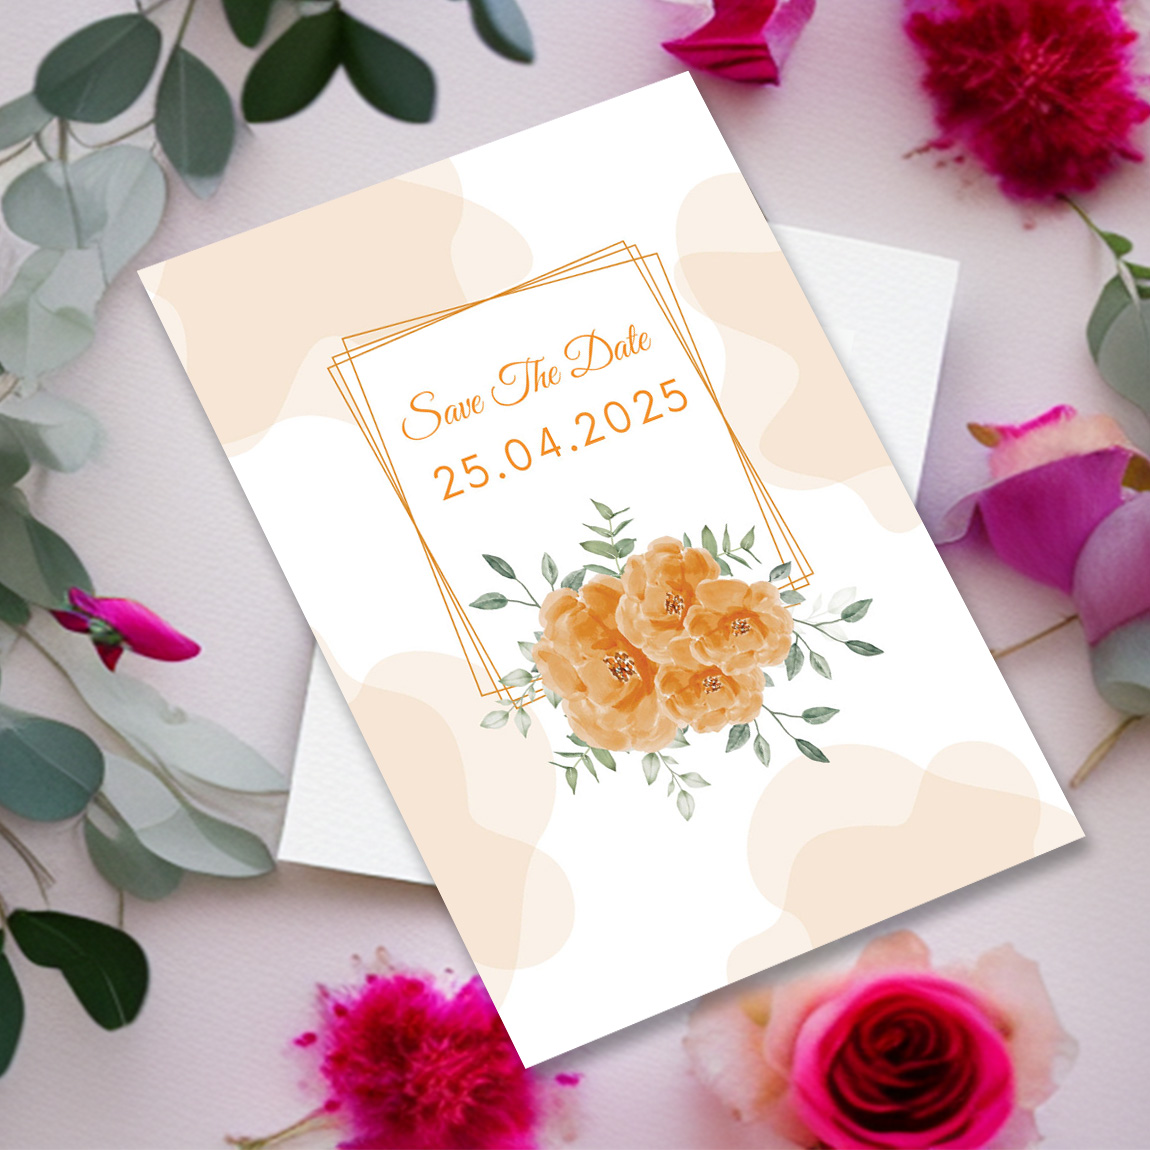 Image with colorful wedding invitation with floral design.